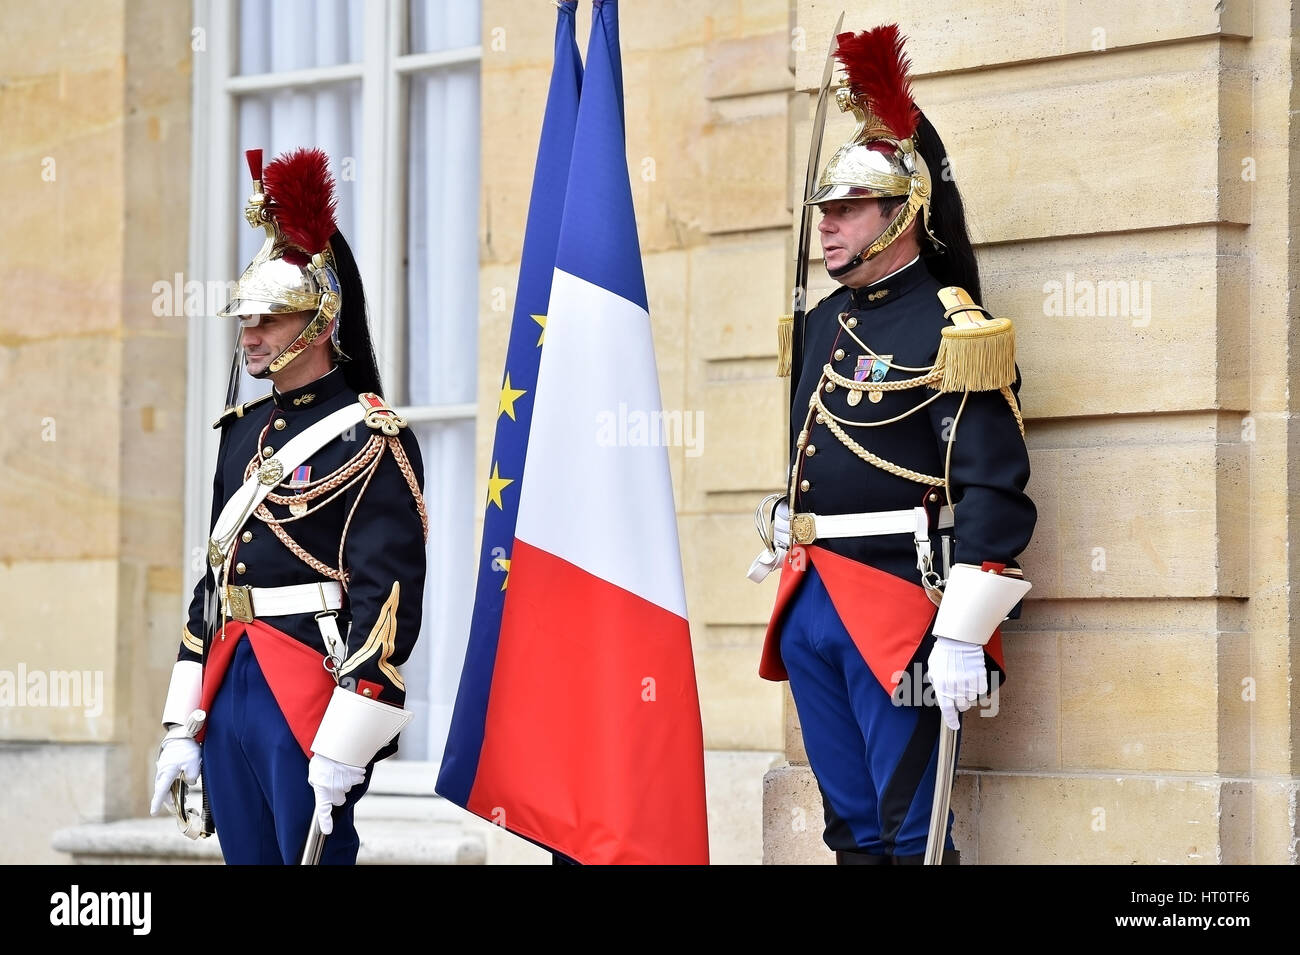 PARIS, FRANCE - JUNE 10: Hotel Matignon Republican Guards of honor during a welcome ceremony on JUNE 10, 2016 in Paris. Matignon is the official resid Stock Photo